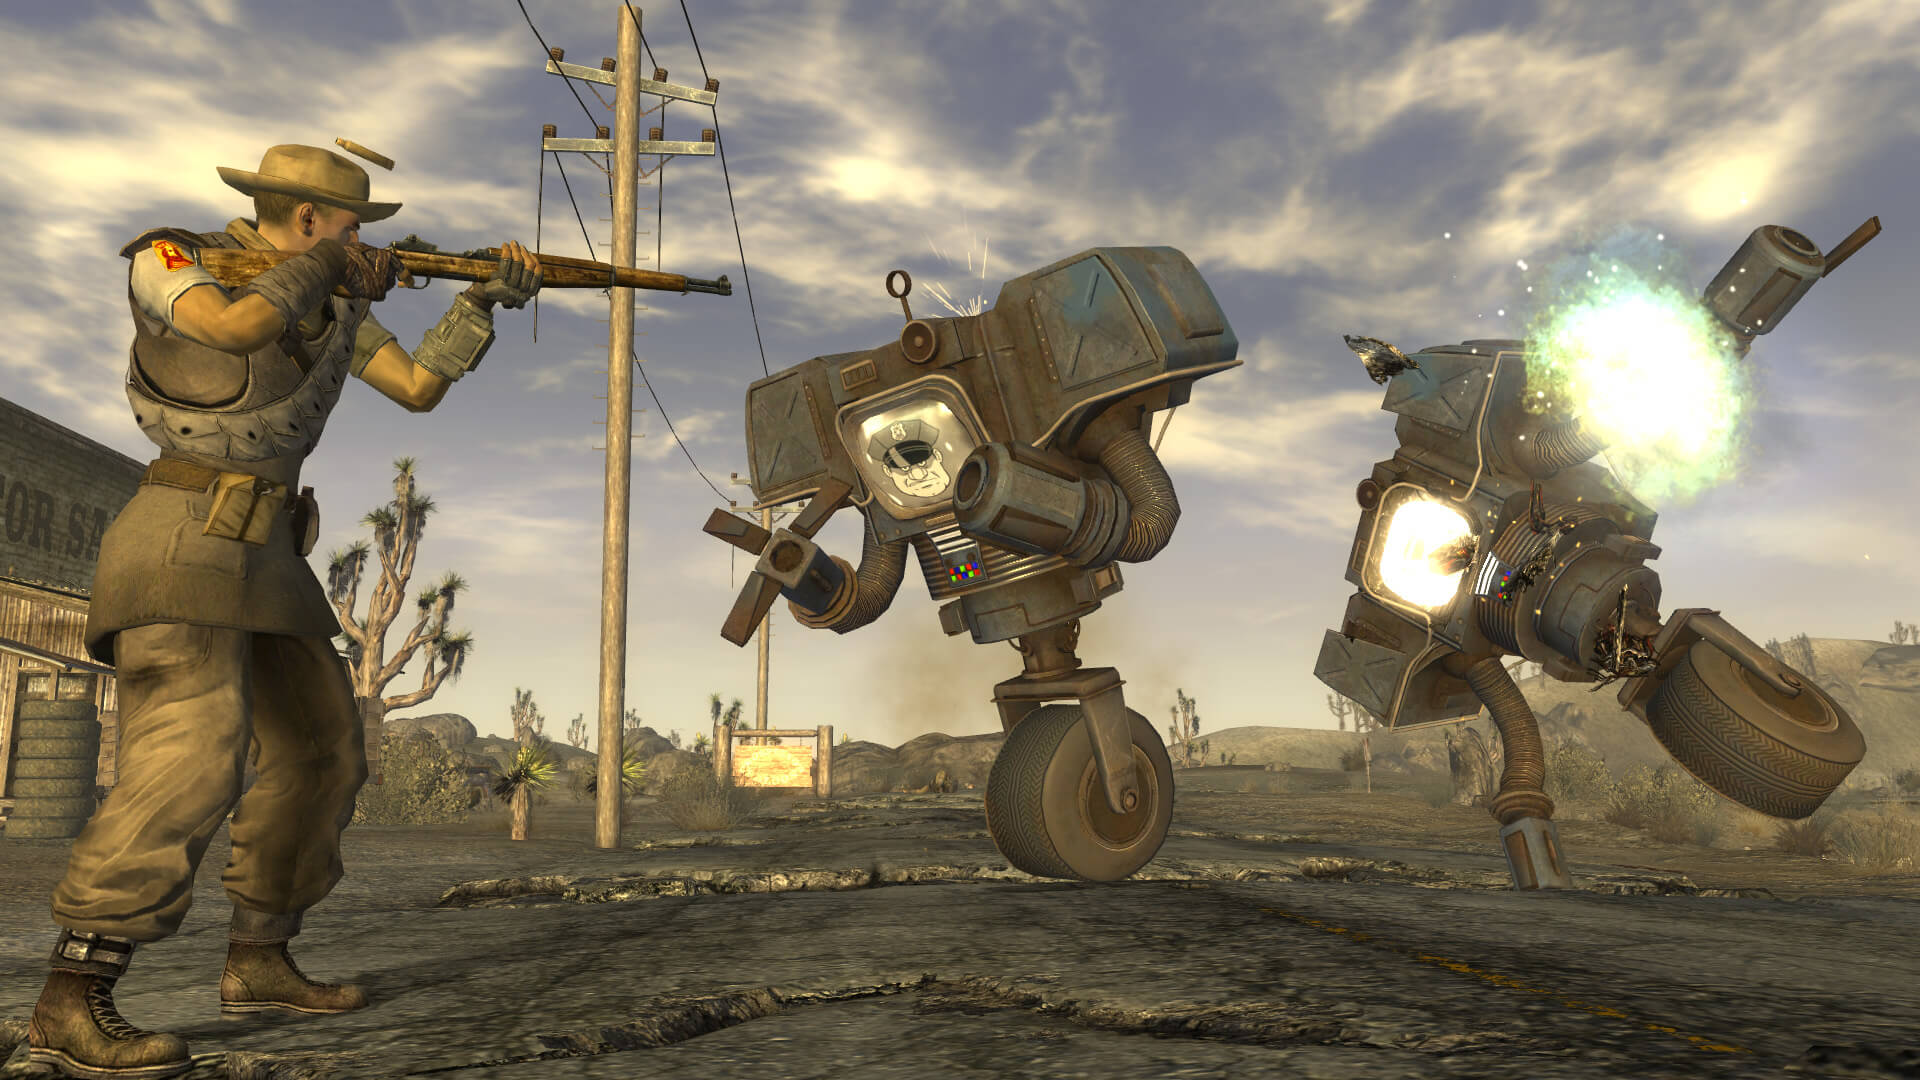 Free Epic games — In Fallout: New Vegas, the player character opens fire with a rifle on a pair of Securitron robots.